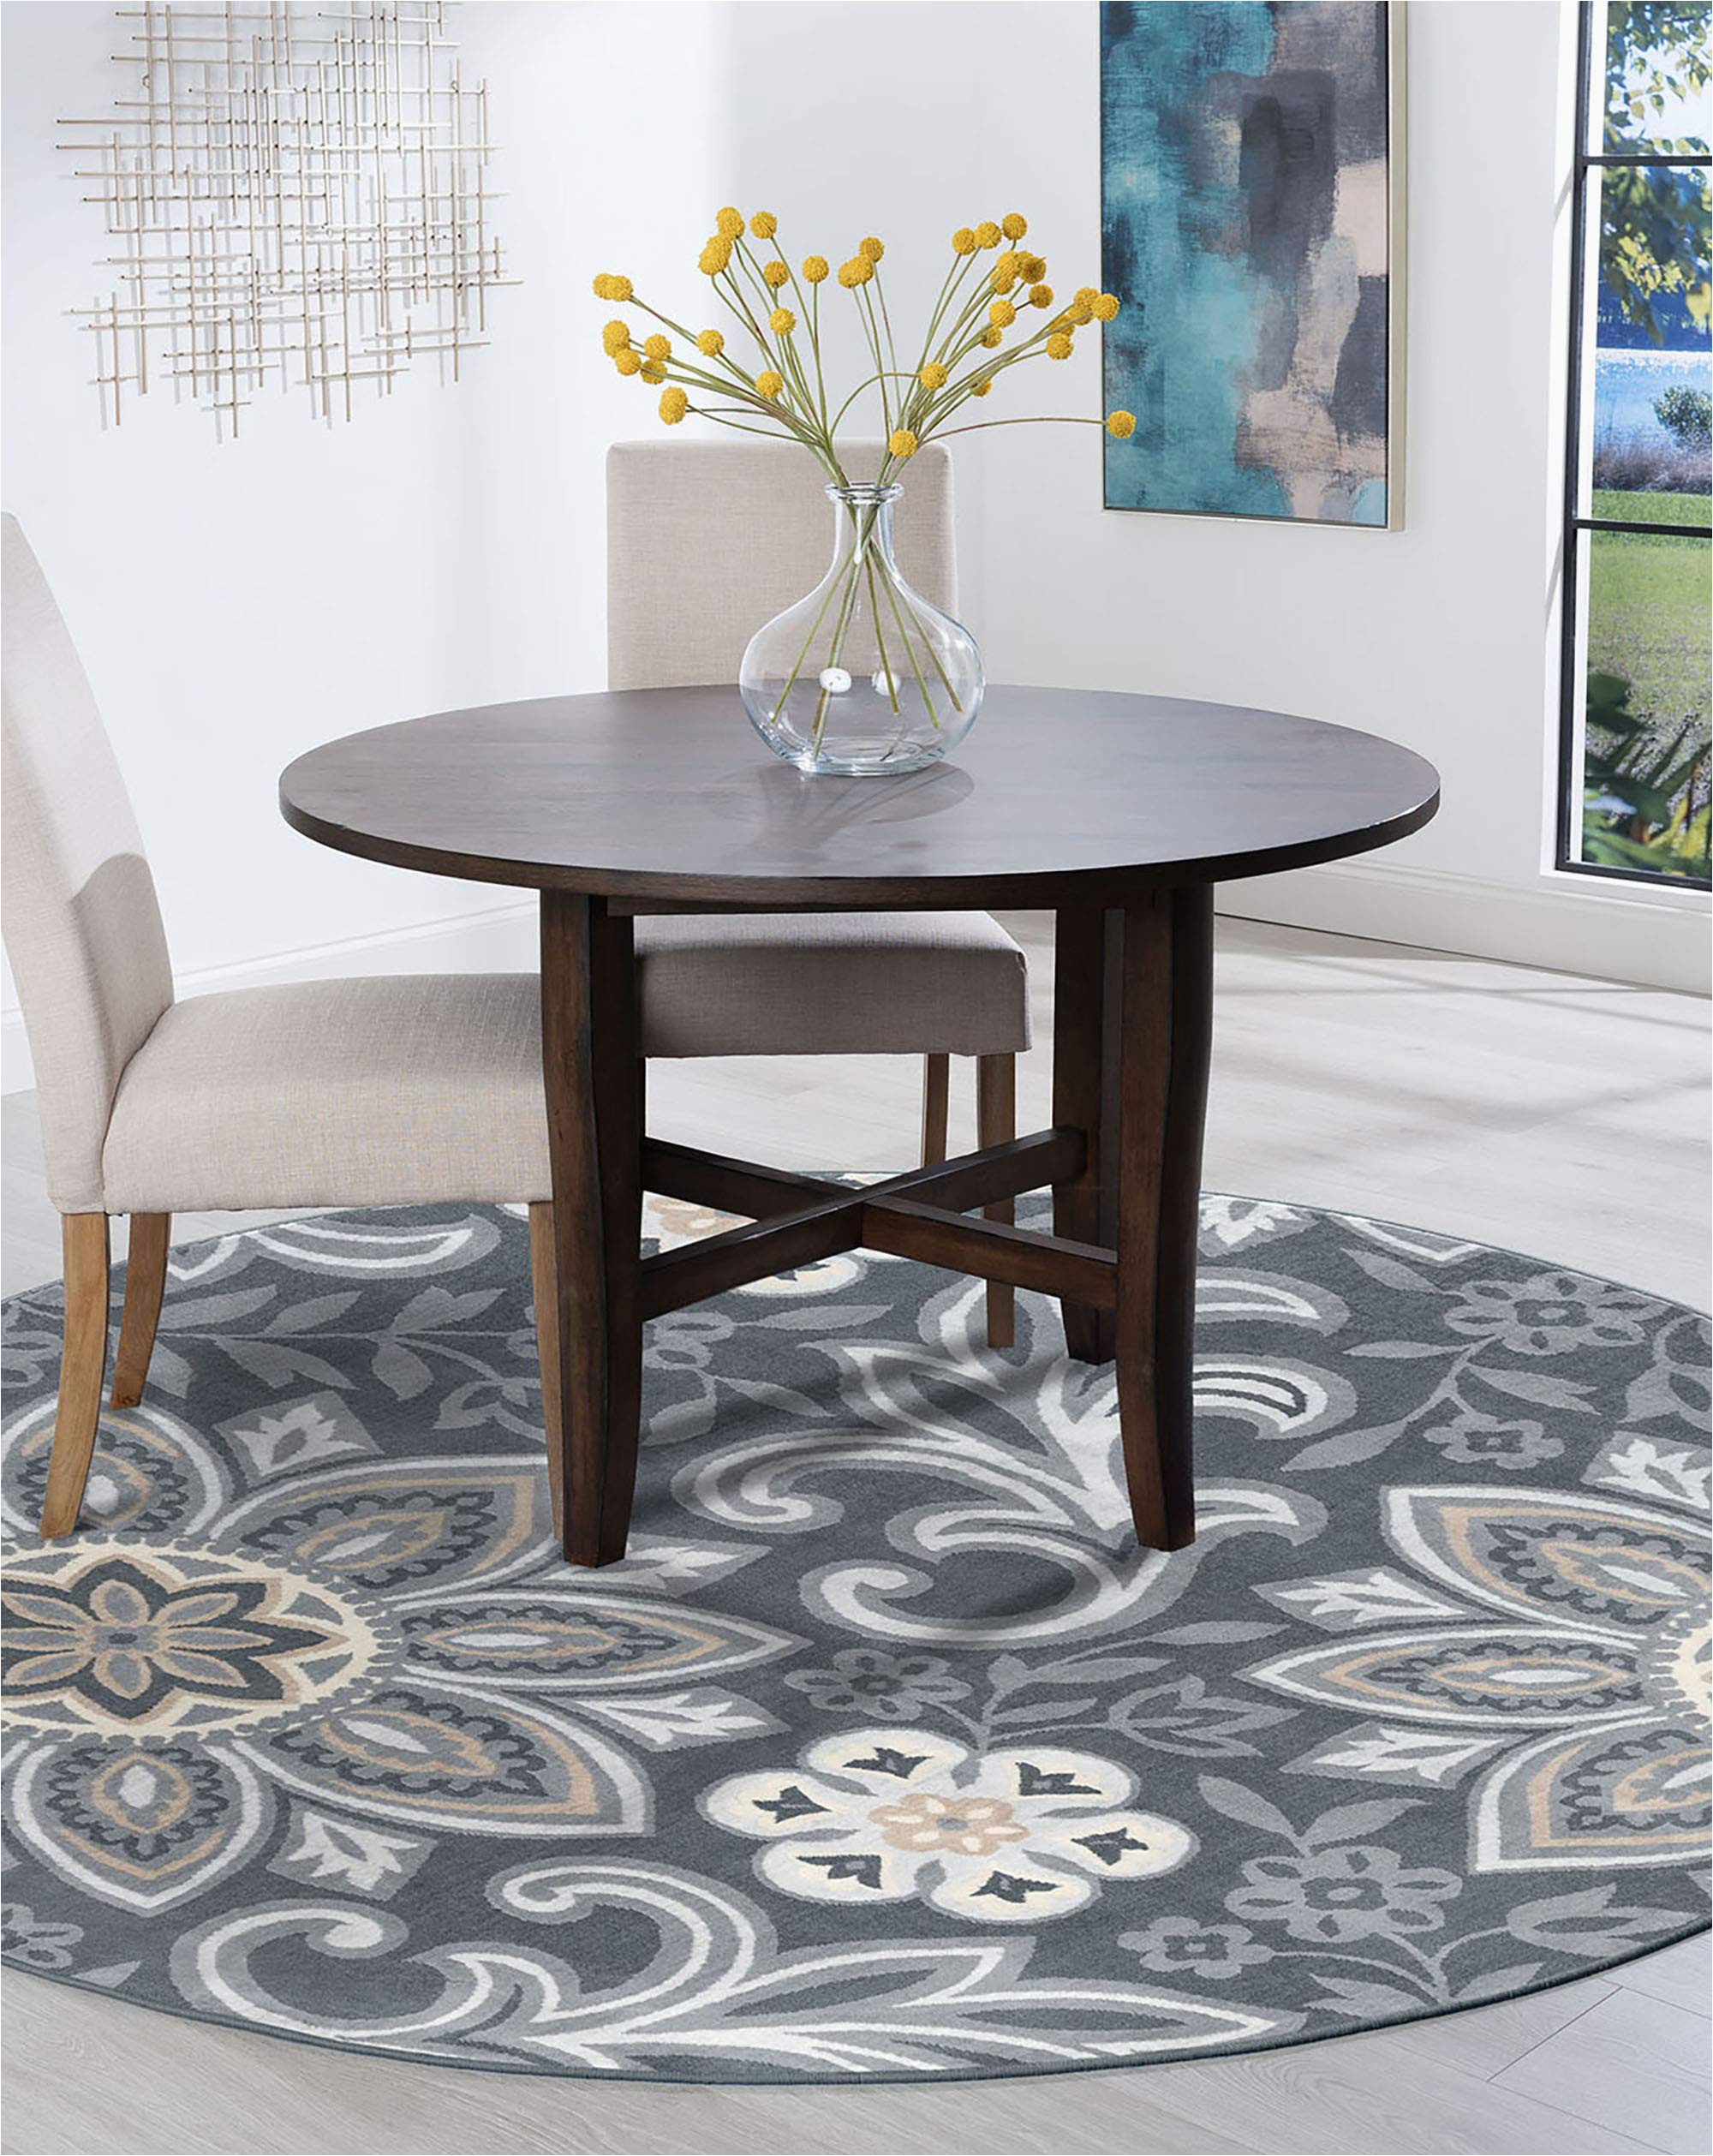 Round area Rug 5 Ft Tayse Piper Dark Gray 6 Foot Round area Rug for Living Bedroom or Dining Room Transitional Floral